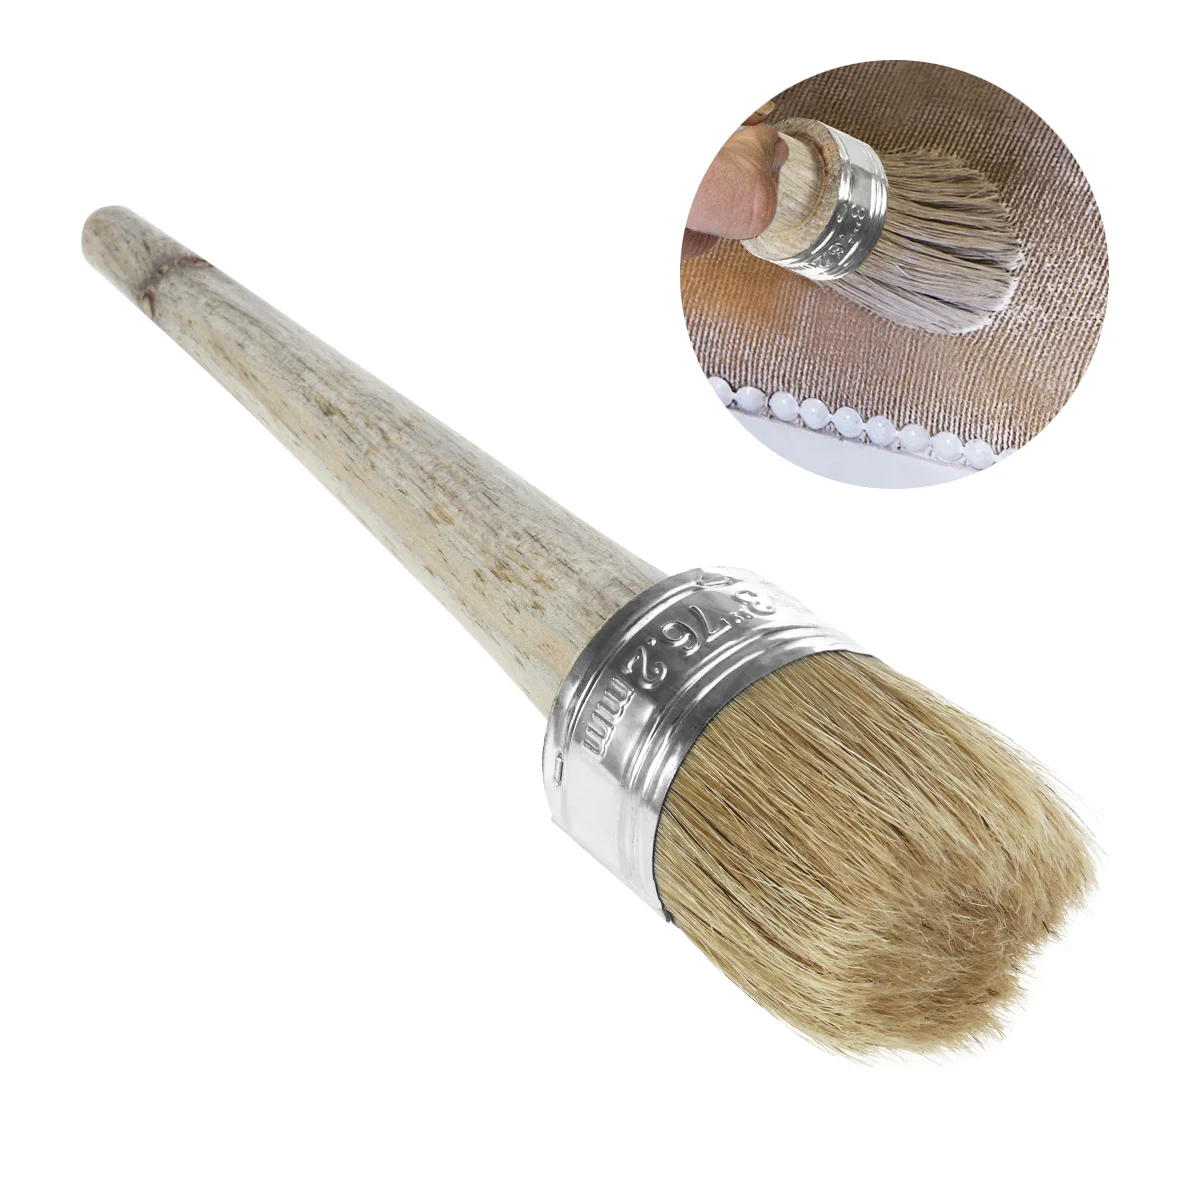 

50mm Round Wax Brush Brush Painting Brush Furniture Wax Brush with Wooden Handle for DIY Stencil Home Decor